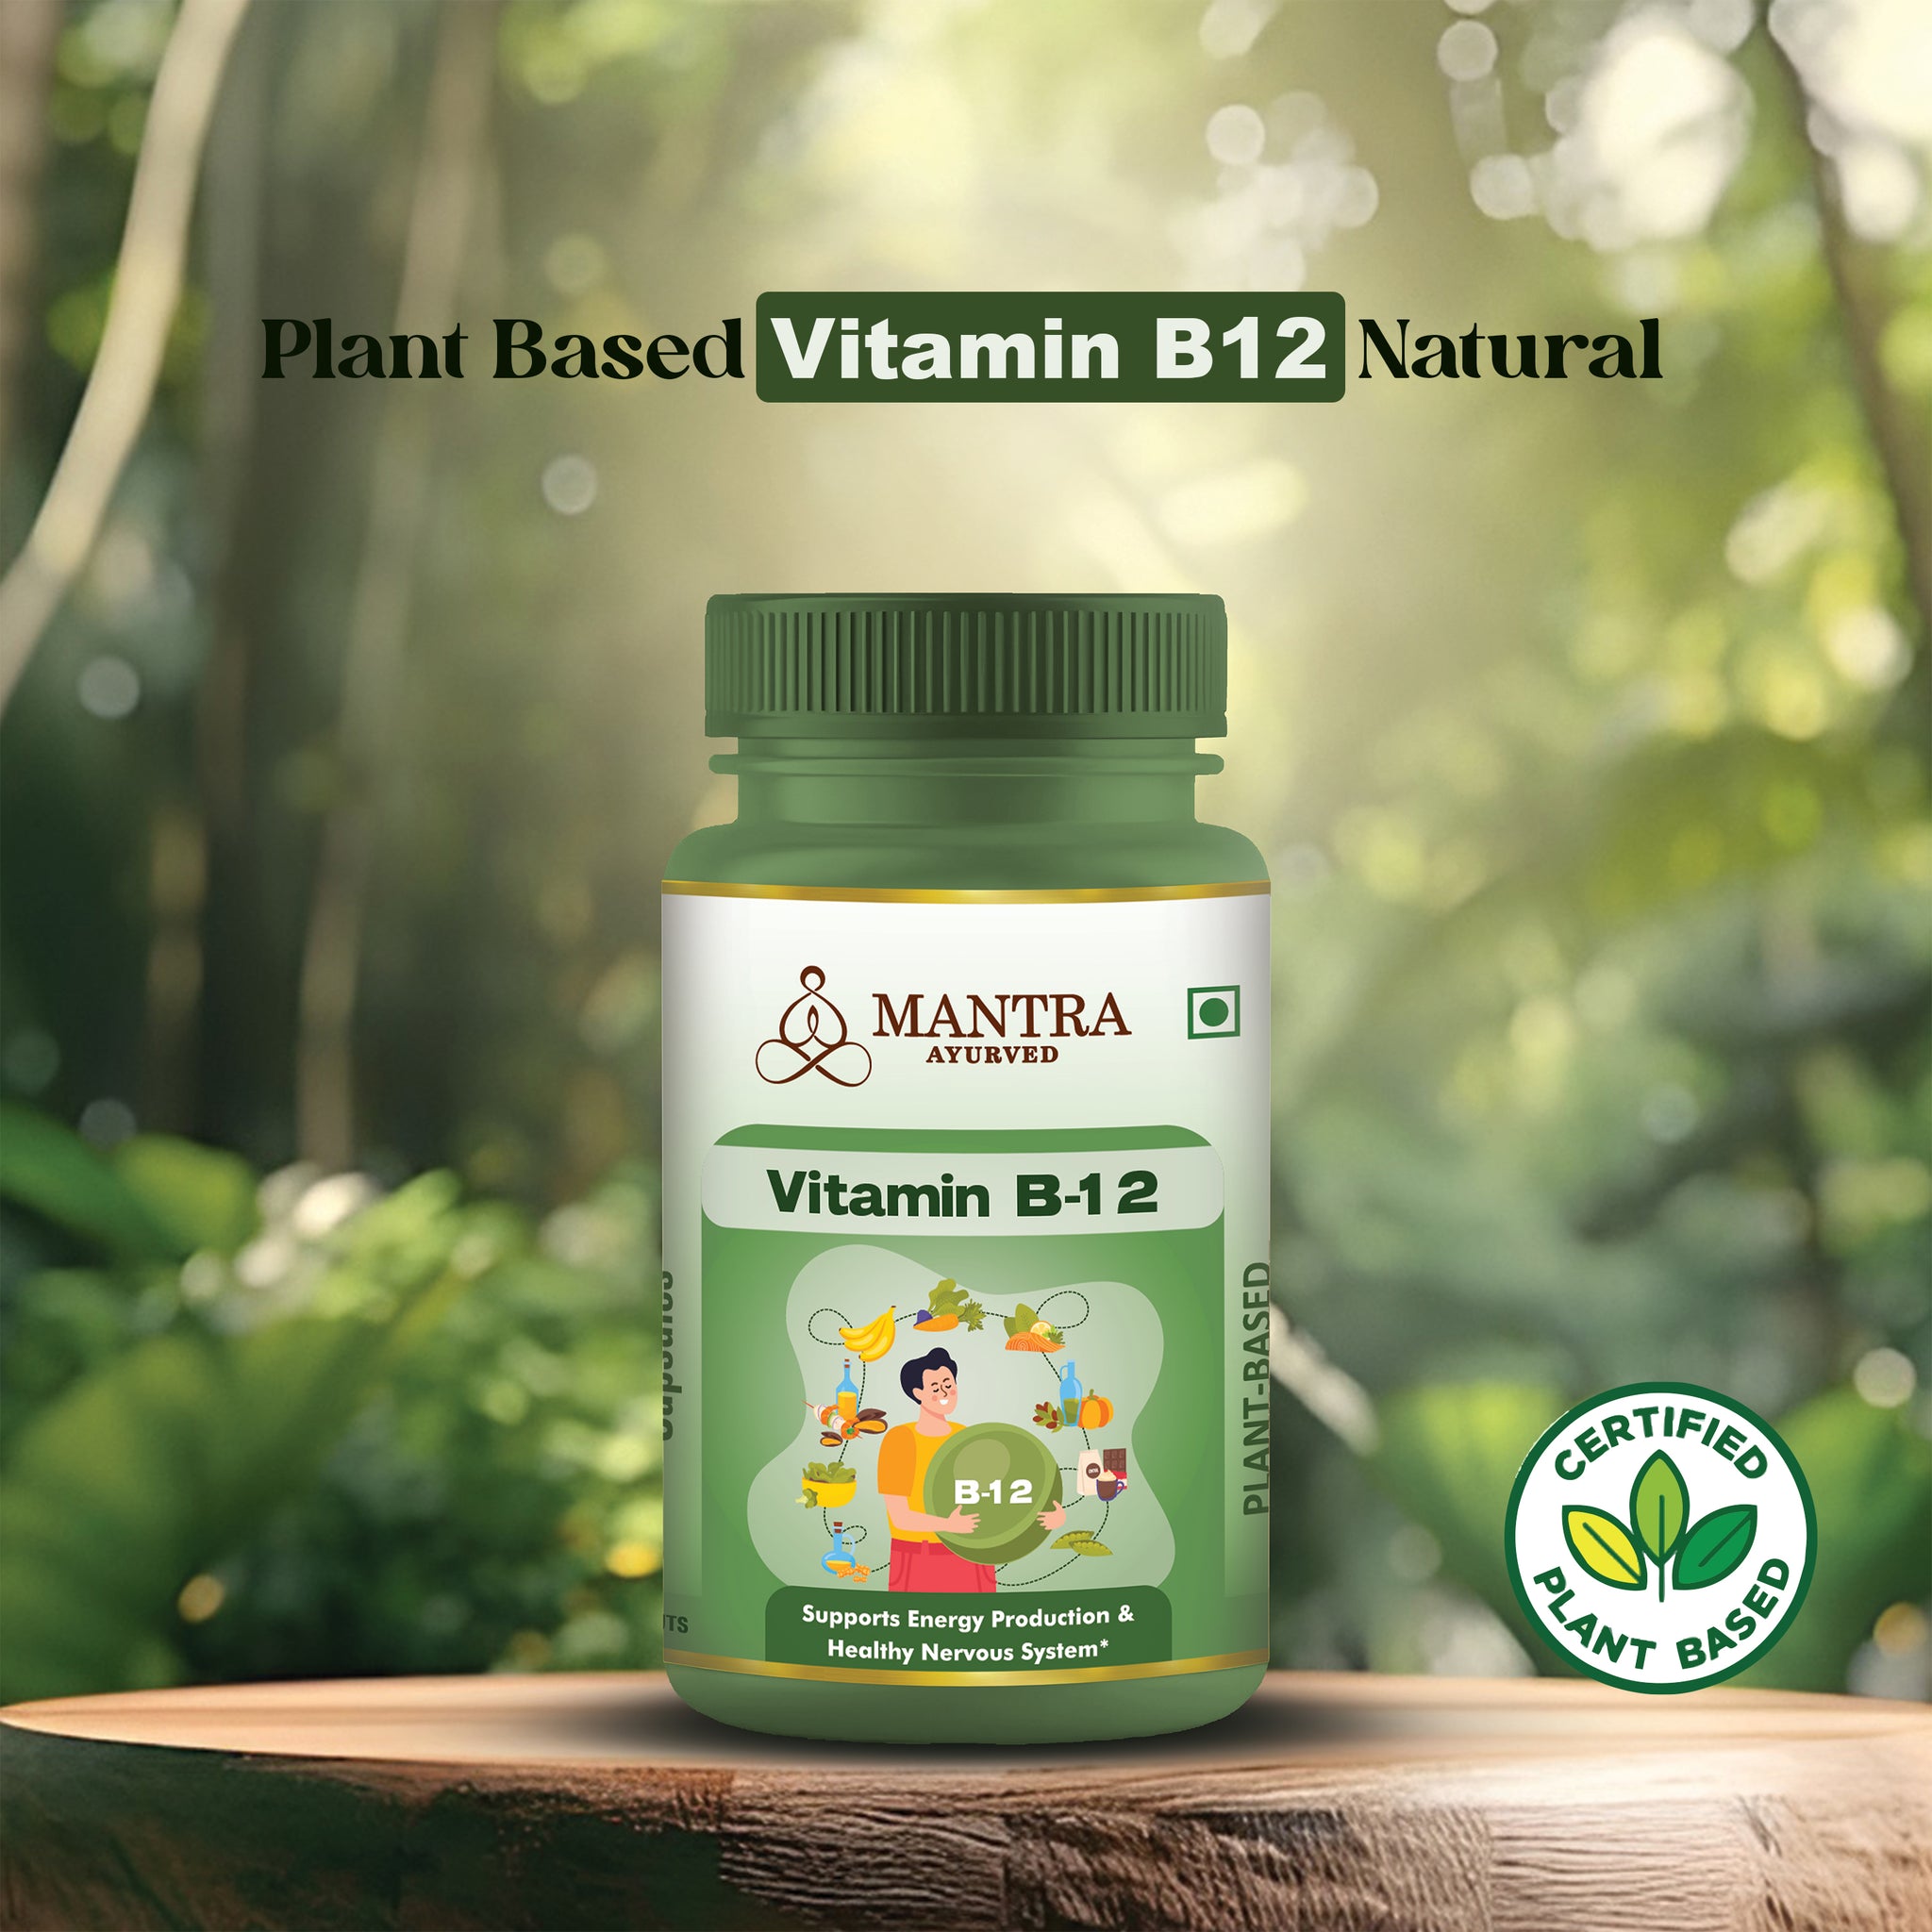 Daily Super Foods Vitamin B12 Capsules for Daily Nutrition, Energy and Immunity